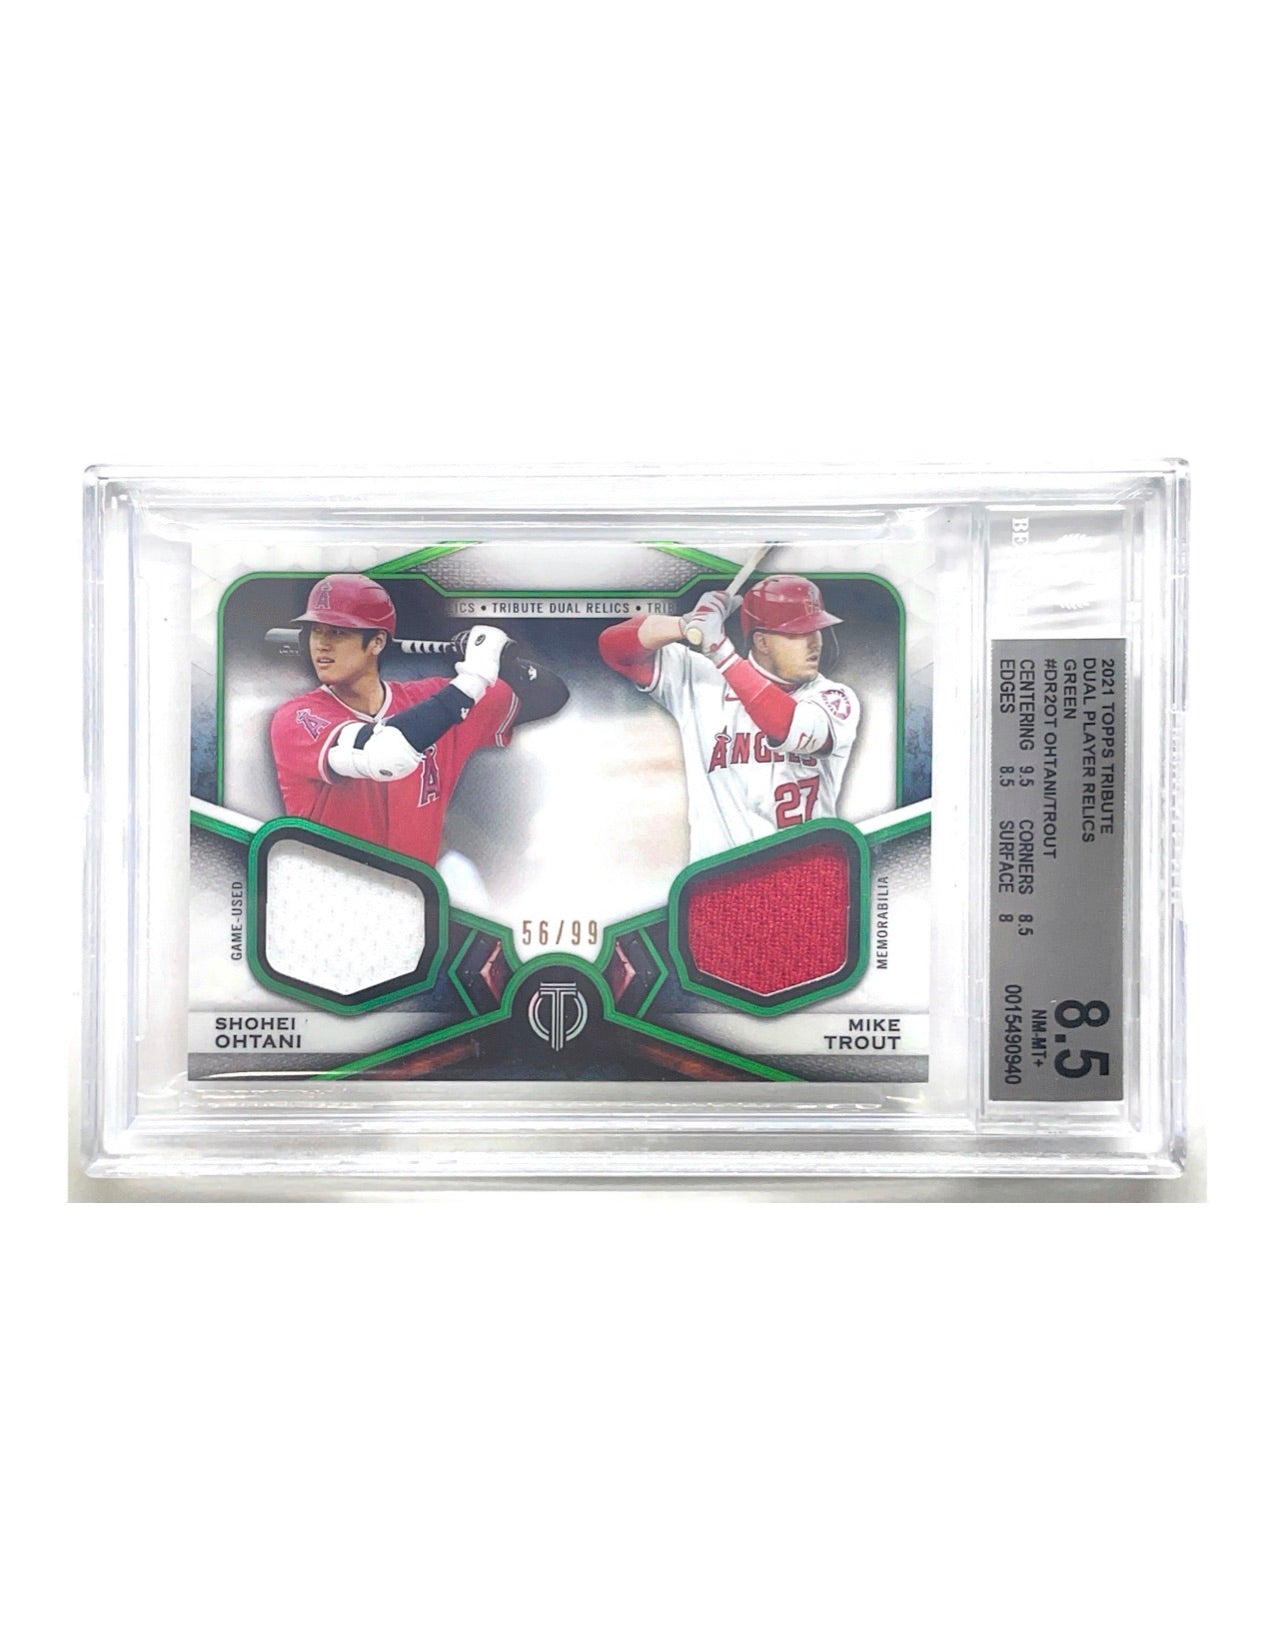 Shohei Ohtani/Mike Trout 2021 Topps Tribute Dual Player Relics Green #DR2-OT - 56/99 - BGS 8.5